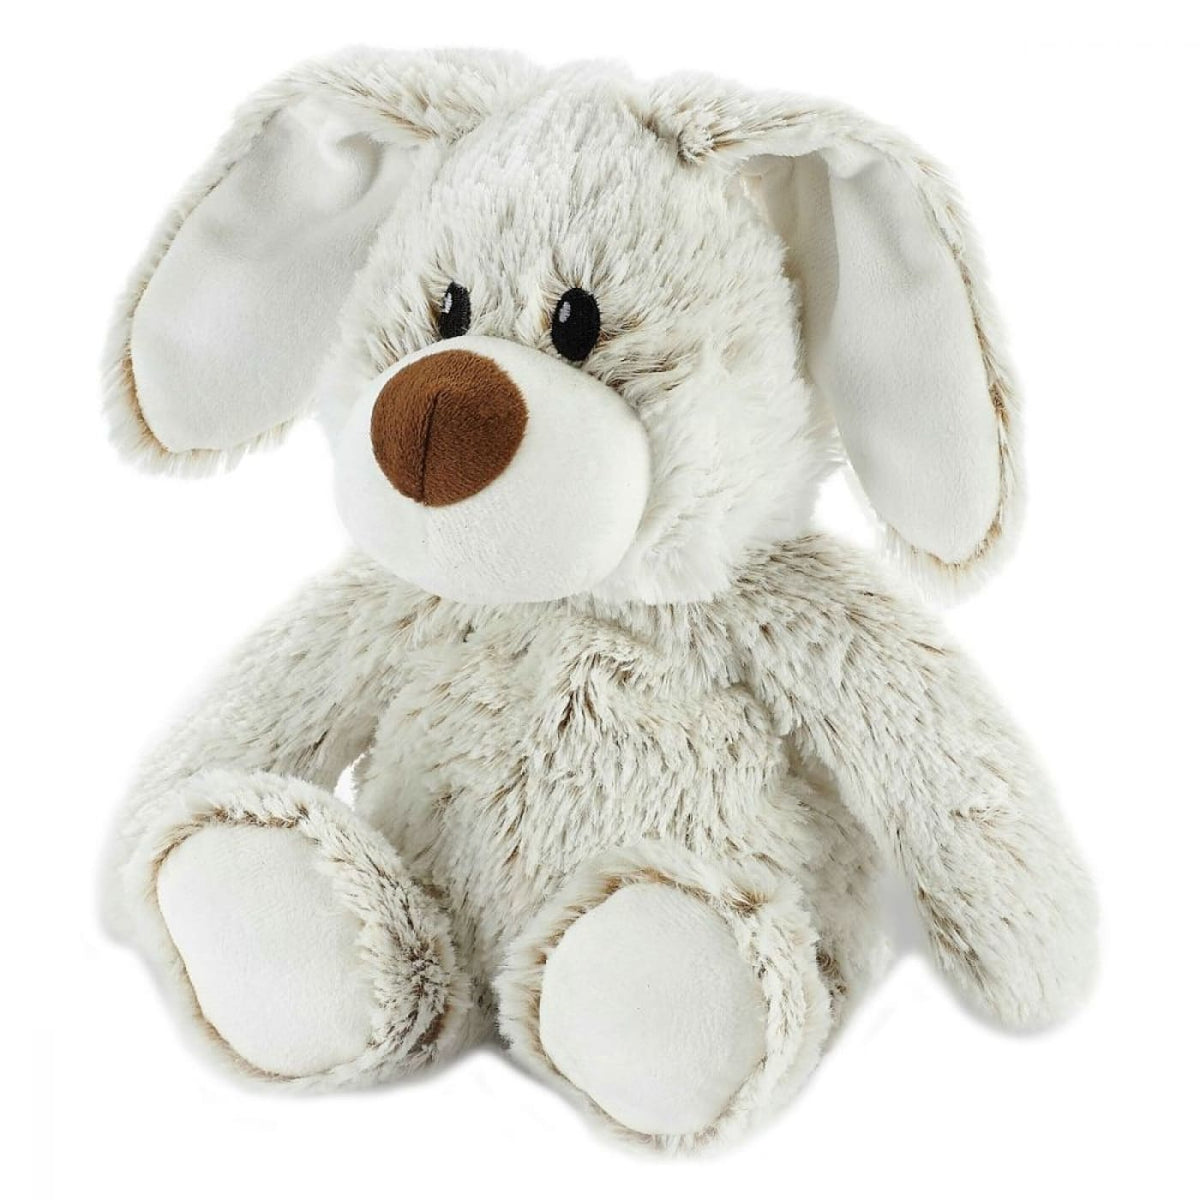 Warmies Heatable Soft Toy Scented with French Lavender - Bunny - Bunny - HEALTH &amp; HOME SAFETY - THERMOMETERS/MEDICINAL